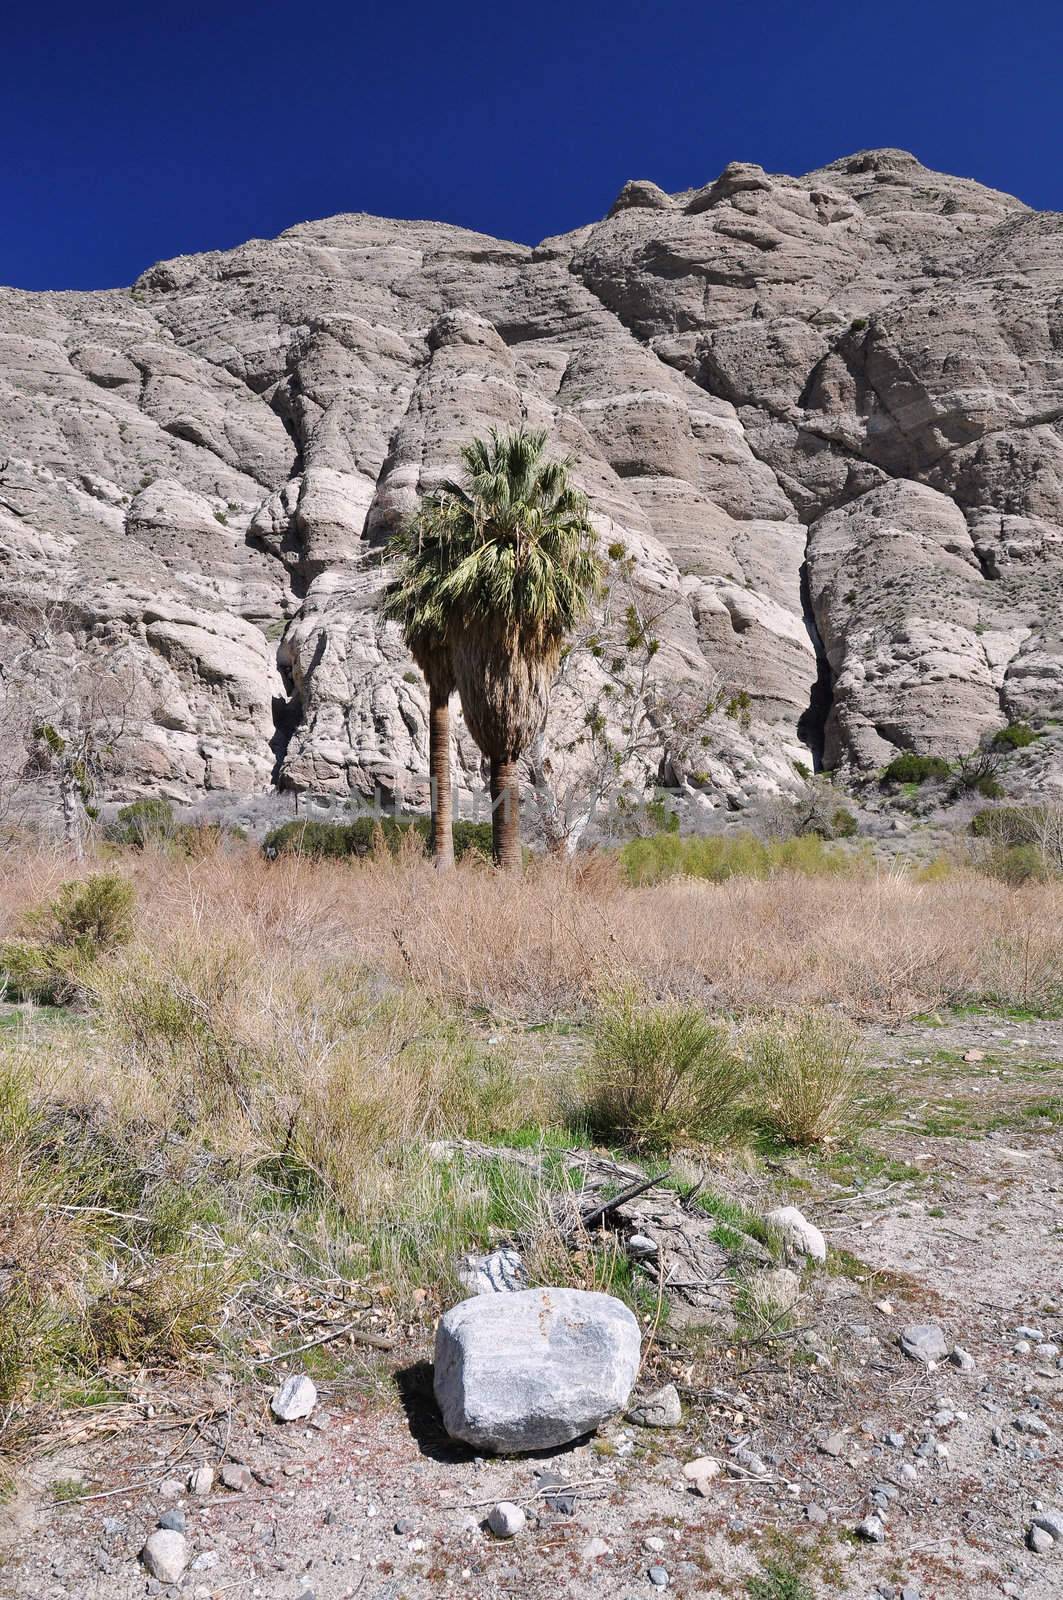 A few palm trees can be found in the barren Whitewater Canyon area near Palm Springs, California.